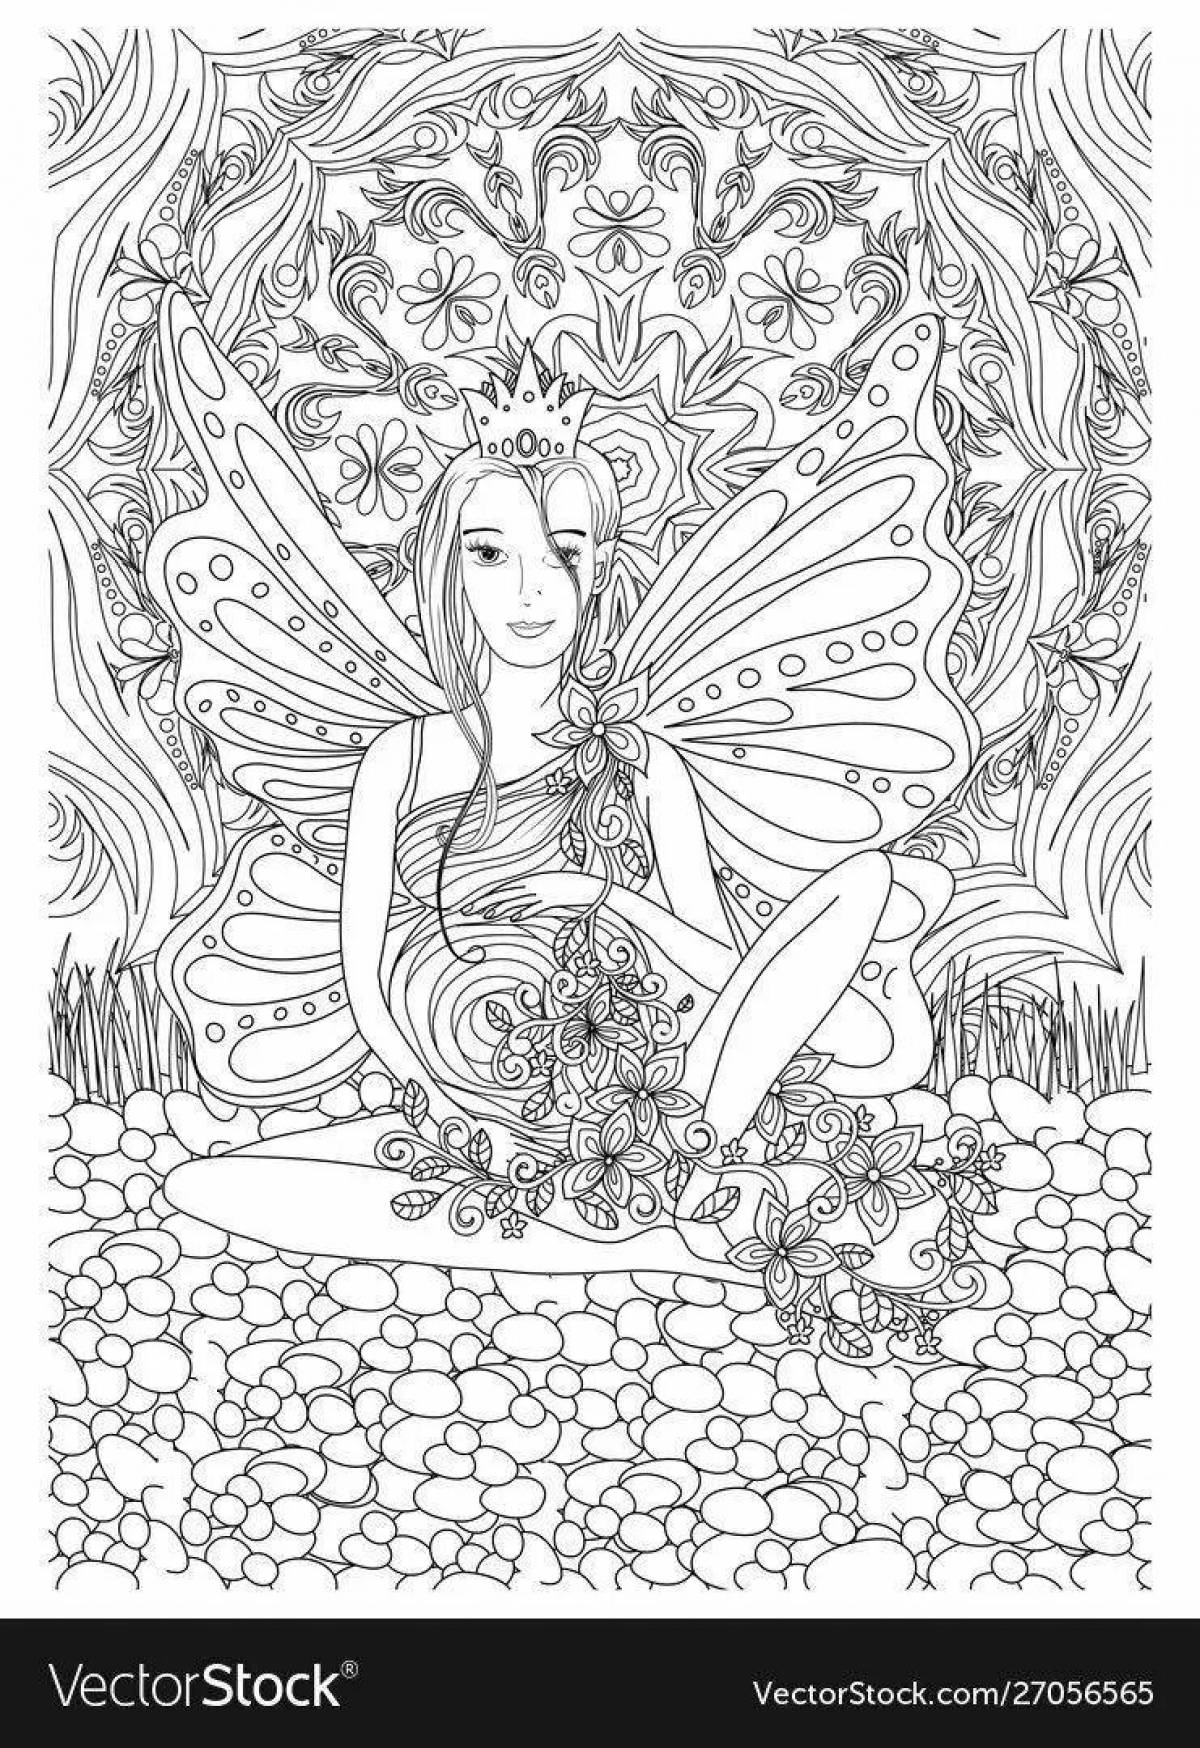 Relaxing pregnancy coloring page